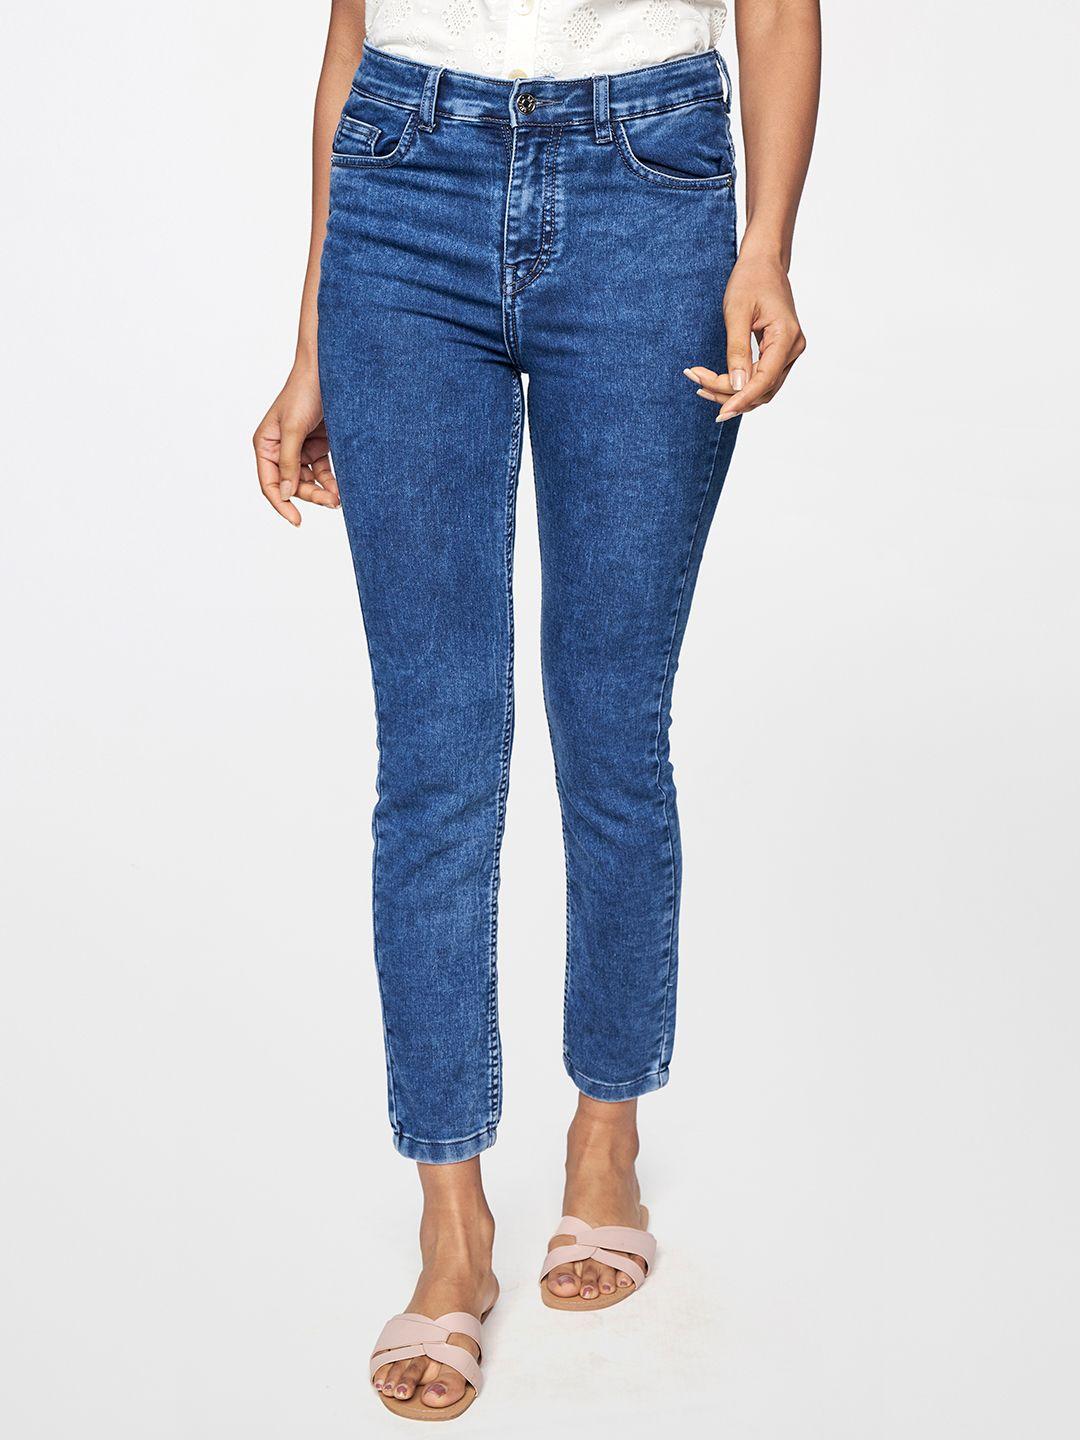 and-women-blue-skinny-fit-low-rise-jeans